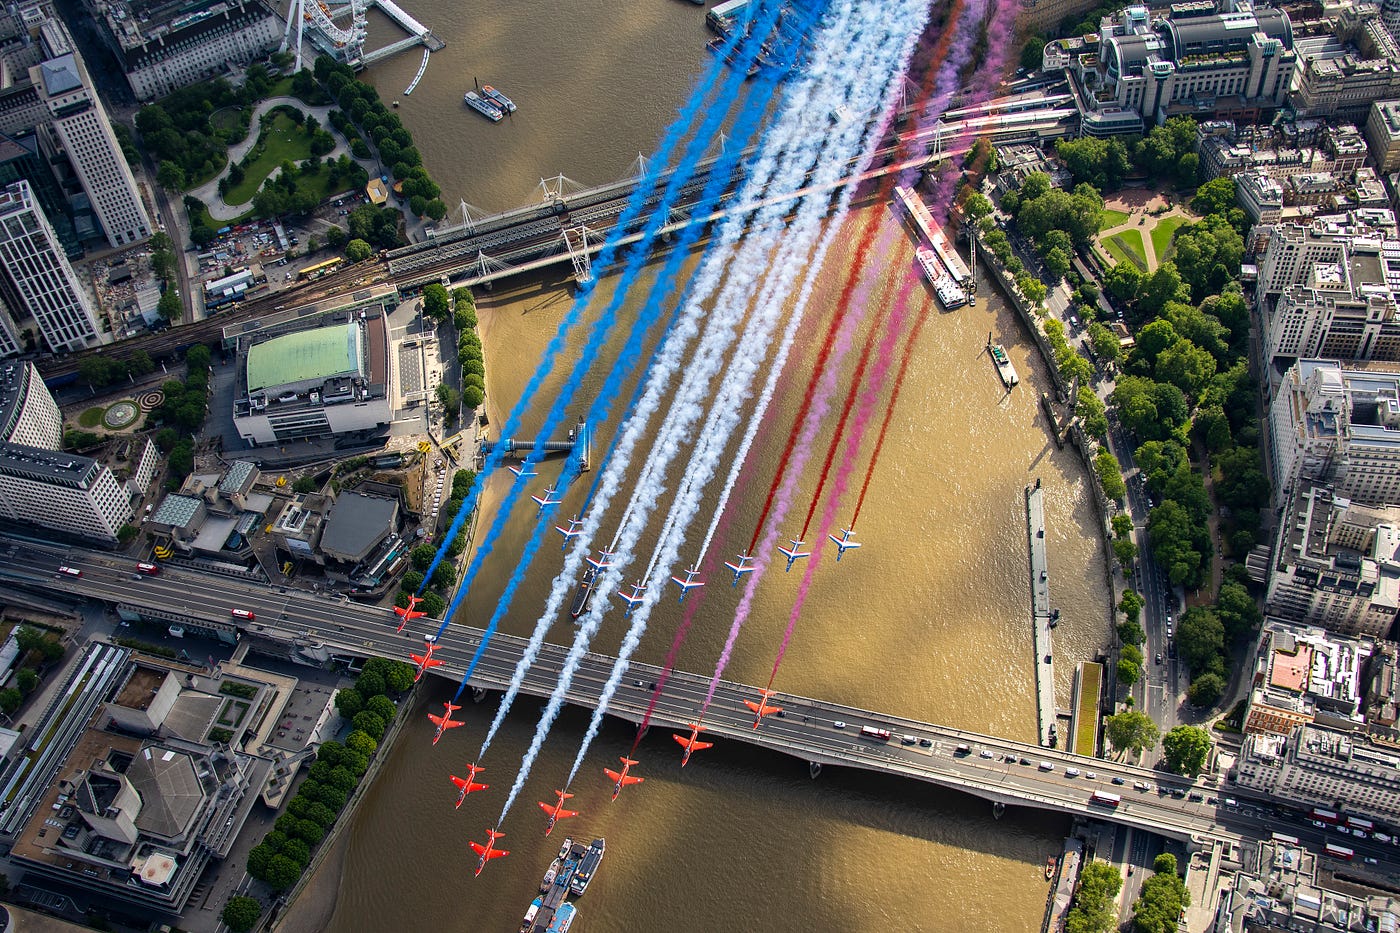 An image of the Red Arrows flying over the River Thames in London.